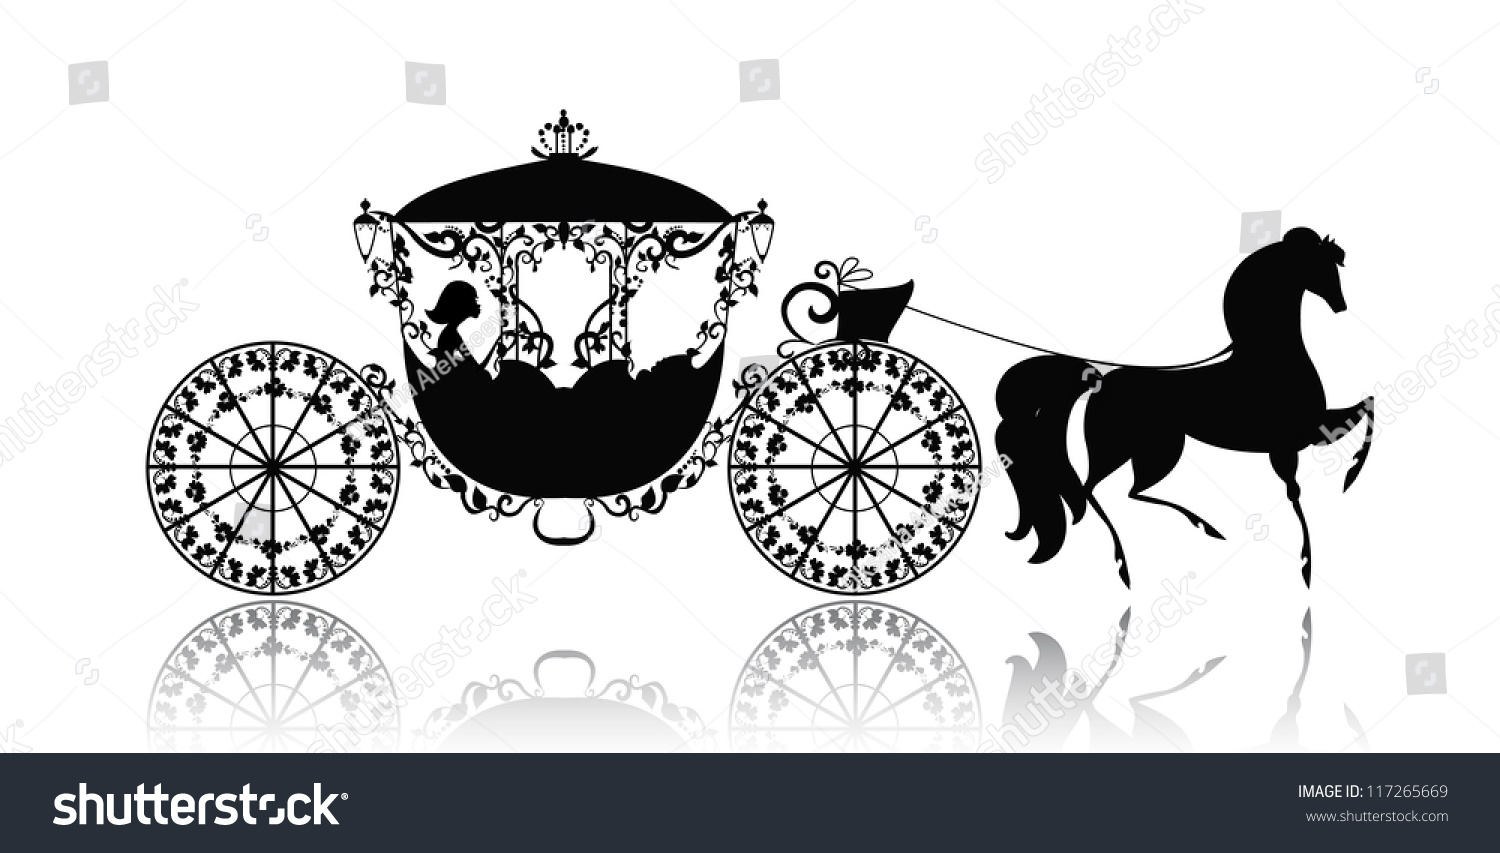 SVG of vintage silhouette of a horse carriage svg